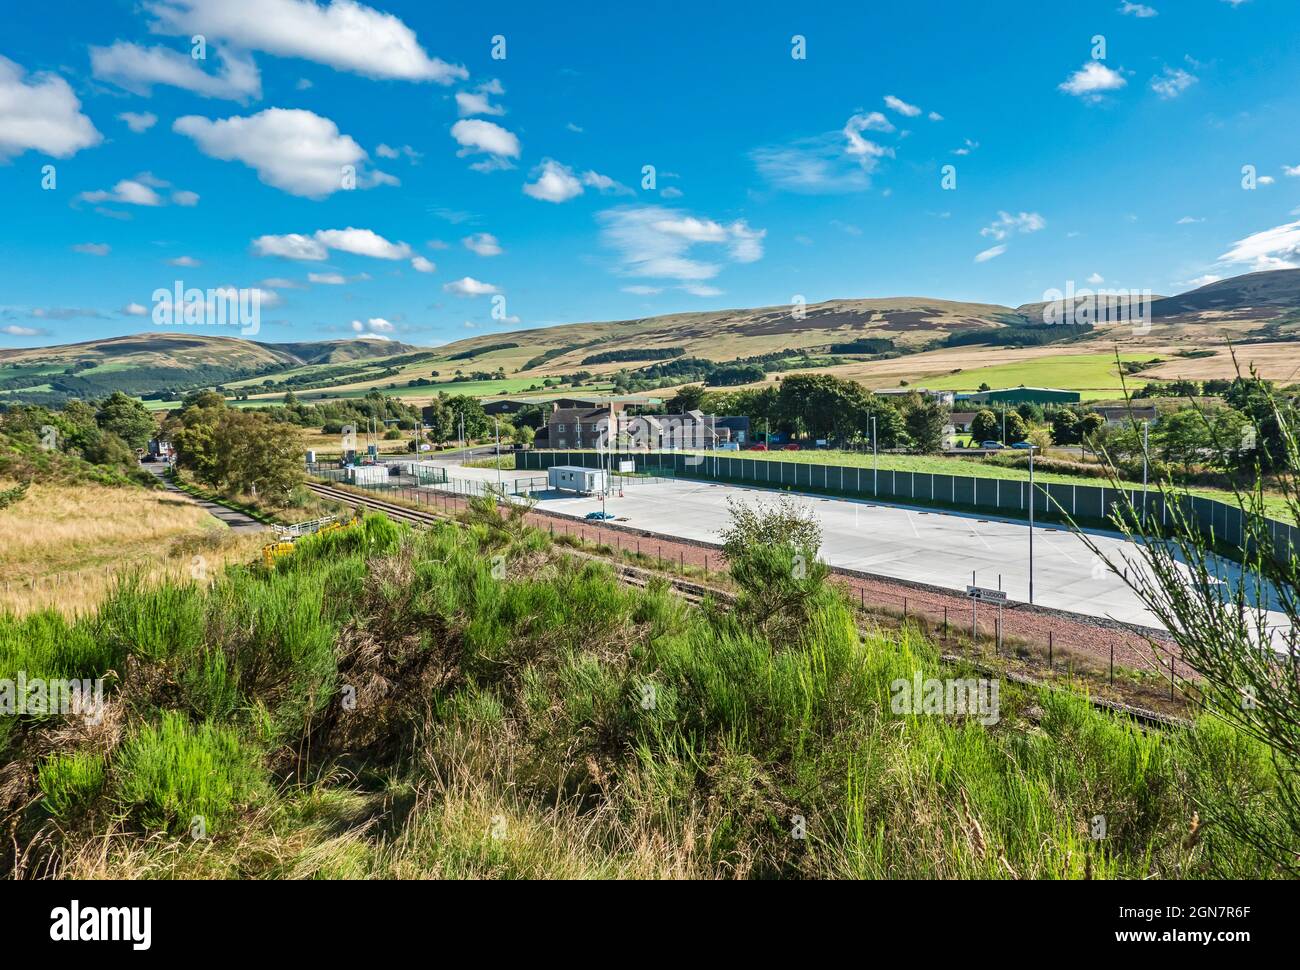 Blackford Rail Freight Facility for Highland Spring in Blackford Perth & Kinross Scotland UK seen from the north side of the facility Stock Photo